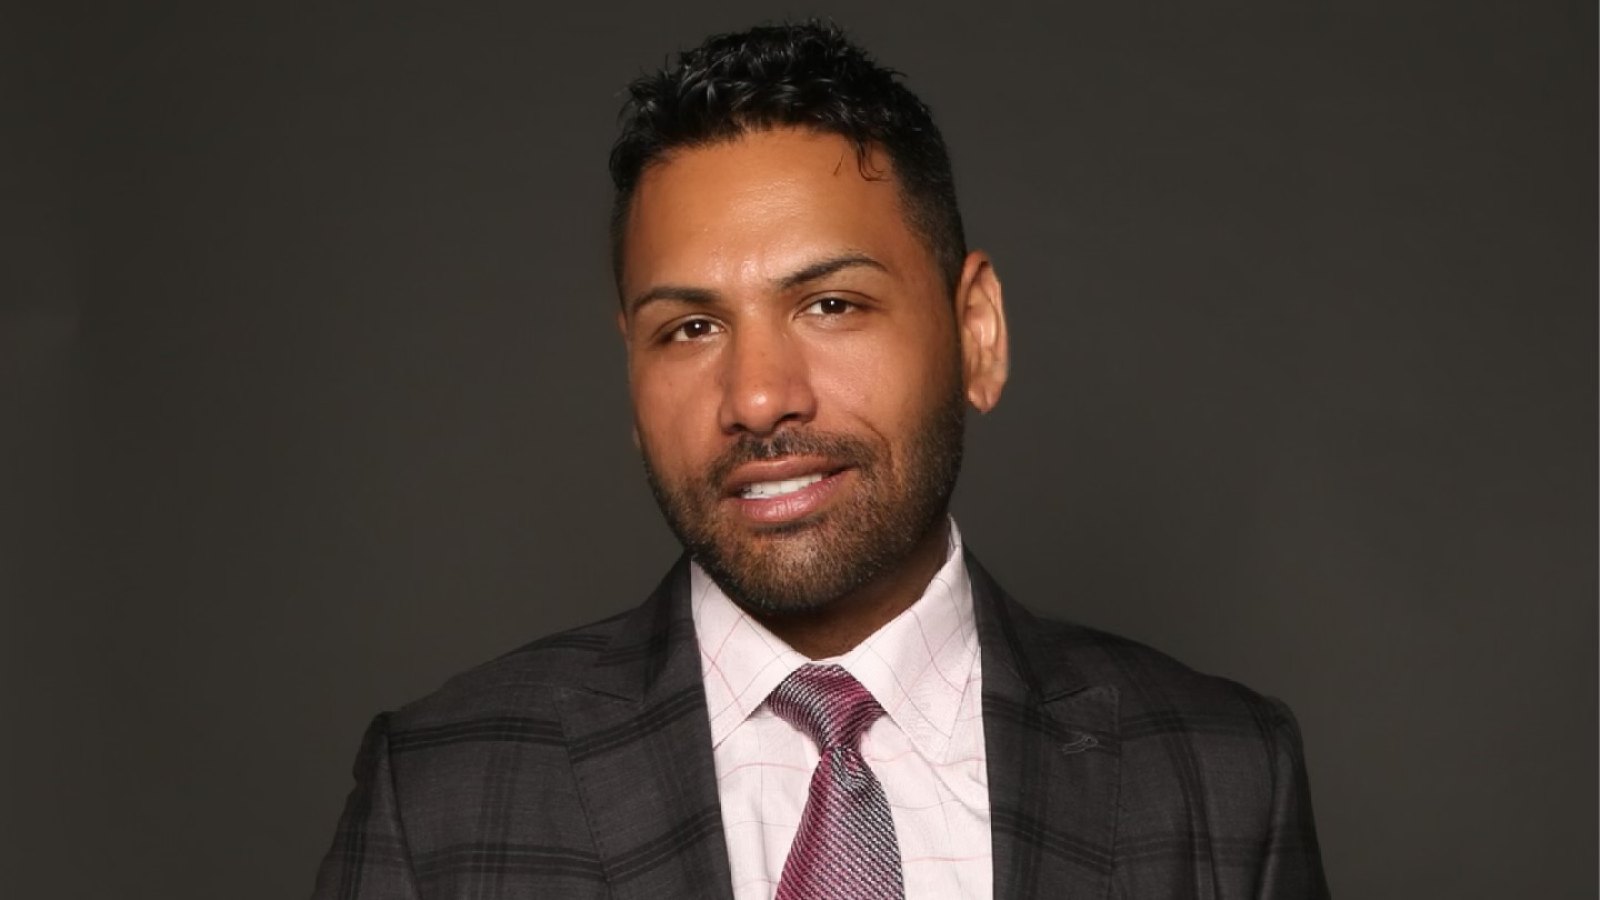 Limitless X Founder and CEO Jas Mathur Teams Up With HealthCorps for Partnership to Empower Youth